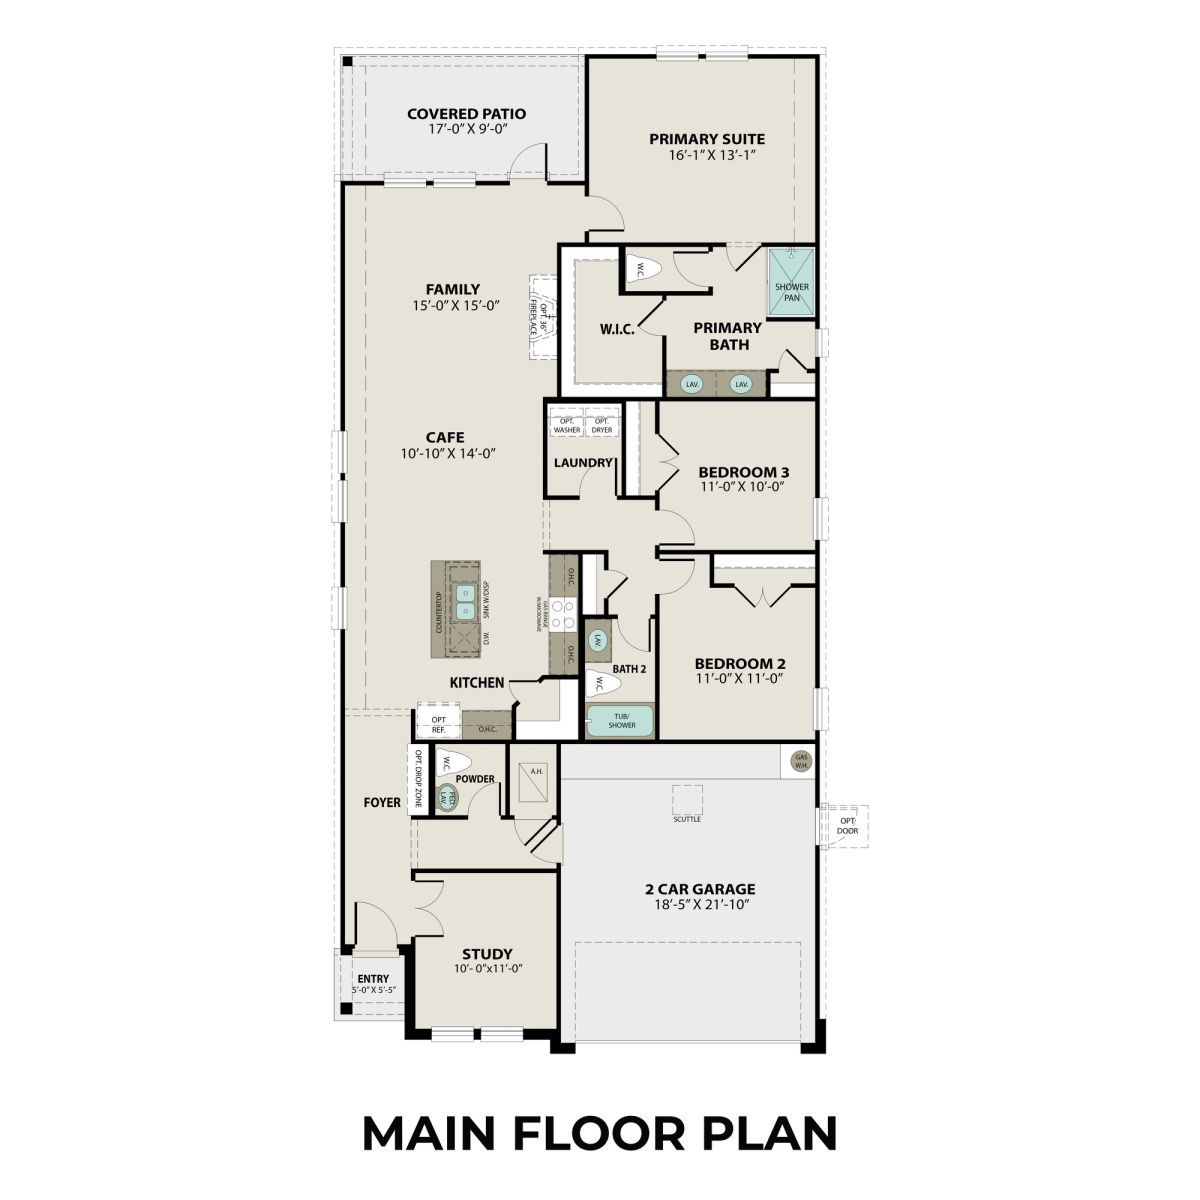 1 - The Riviera A floor plan layout for 213 Harlingen Drive in Davidson Homes' Windmill Estates community.